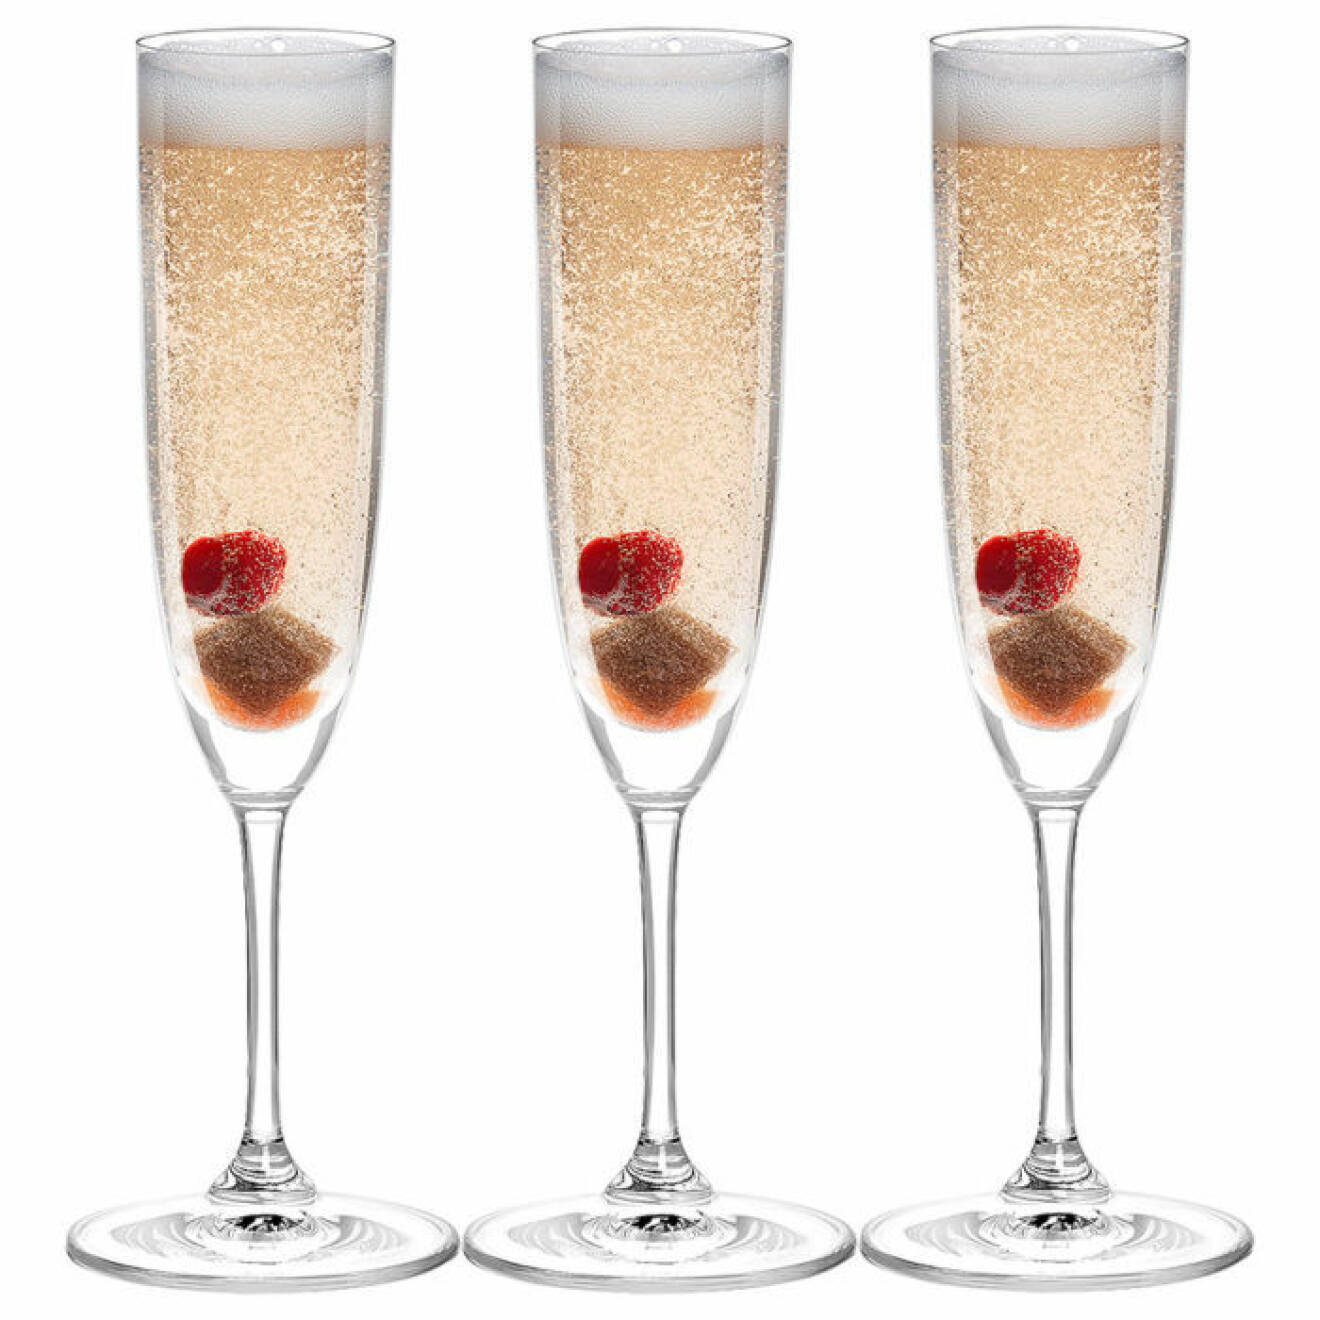 The Champagne Cocktail med cognac.